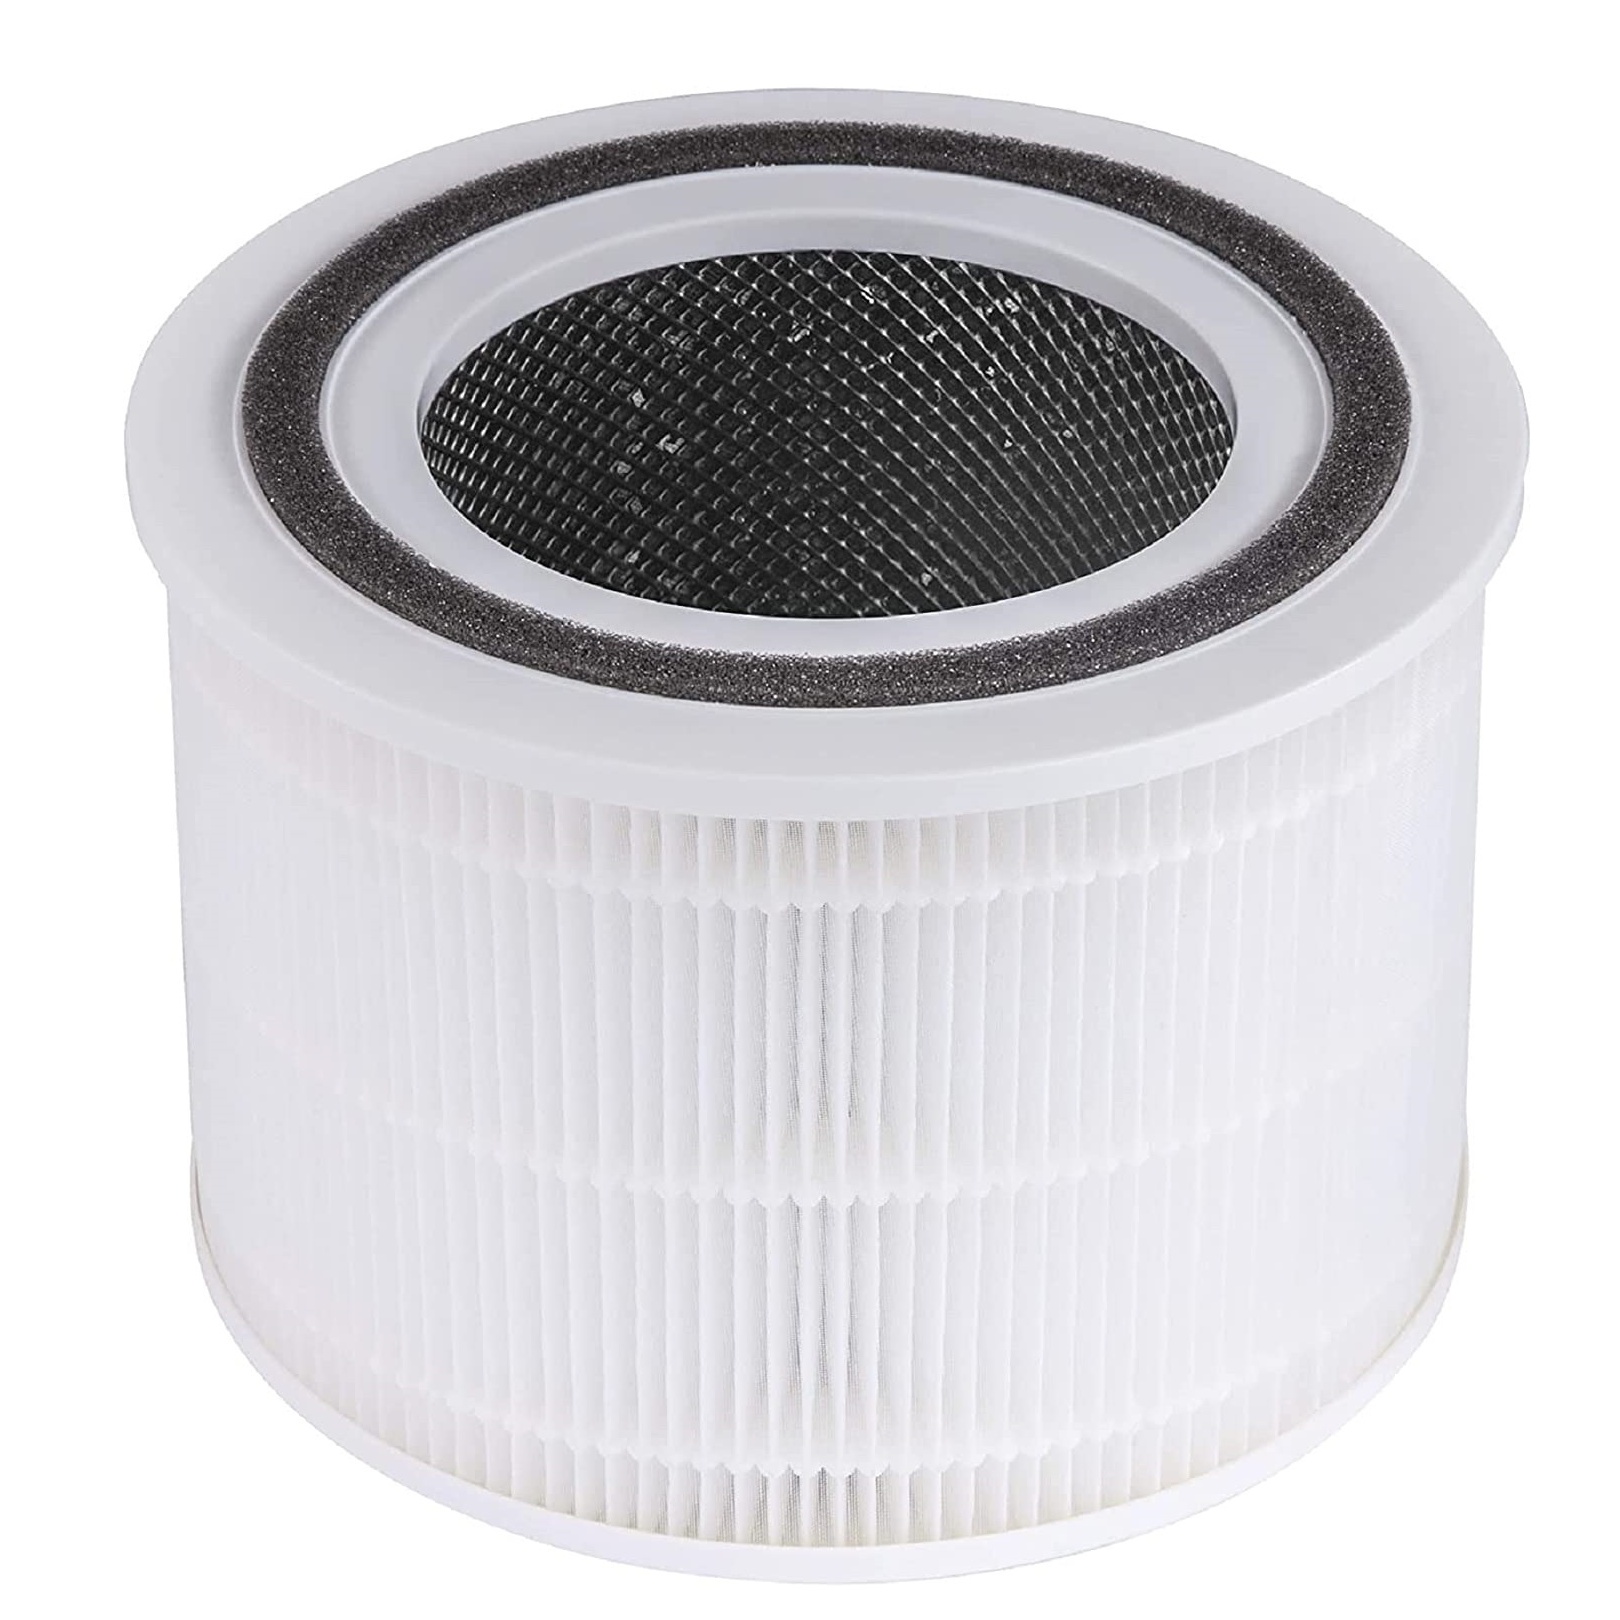  Core 300 Air Purifier Replacement Filter Compatible with LEVOIT  Core 300, Core P350,Core 300S,Core300-P Air Purifier, Core 300S Filter with  3-in-1 H13 True HEPA, Core 300-RF Filter(White),2Pack : Home & Kitchen